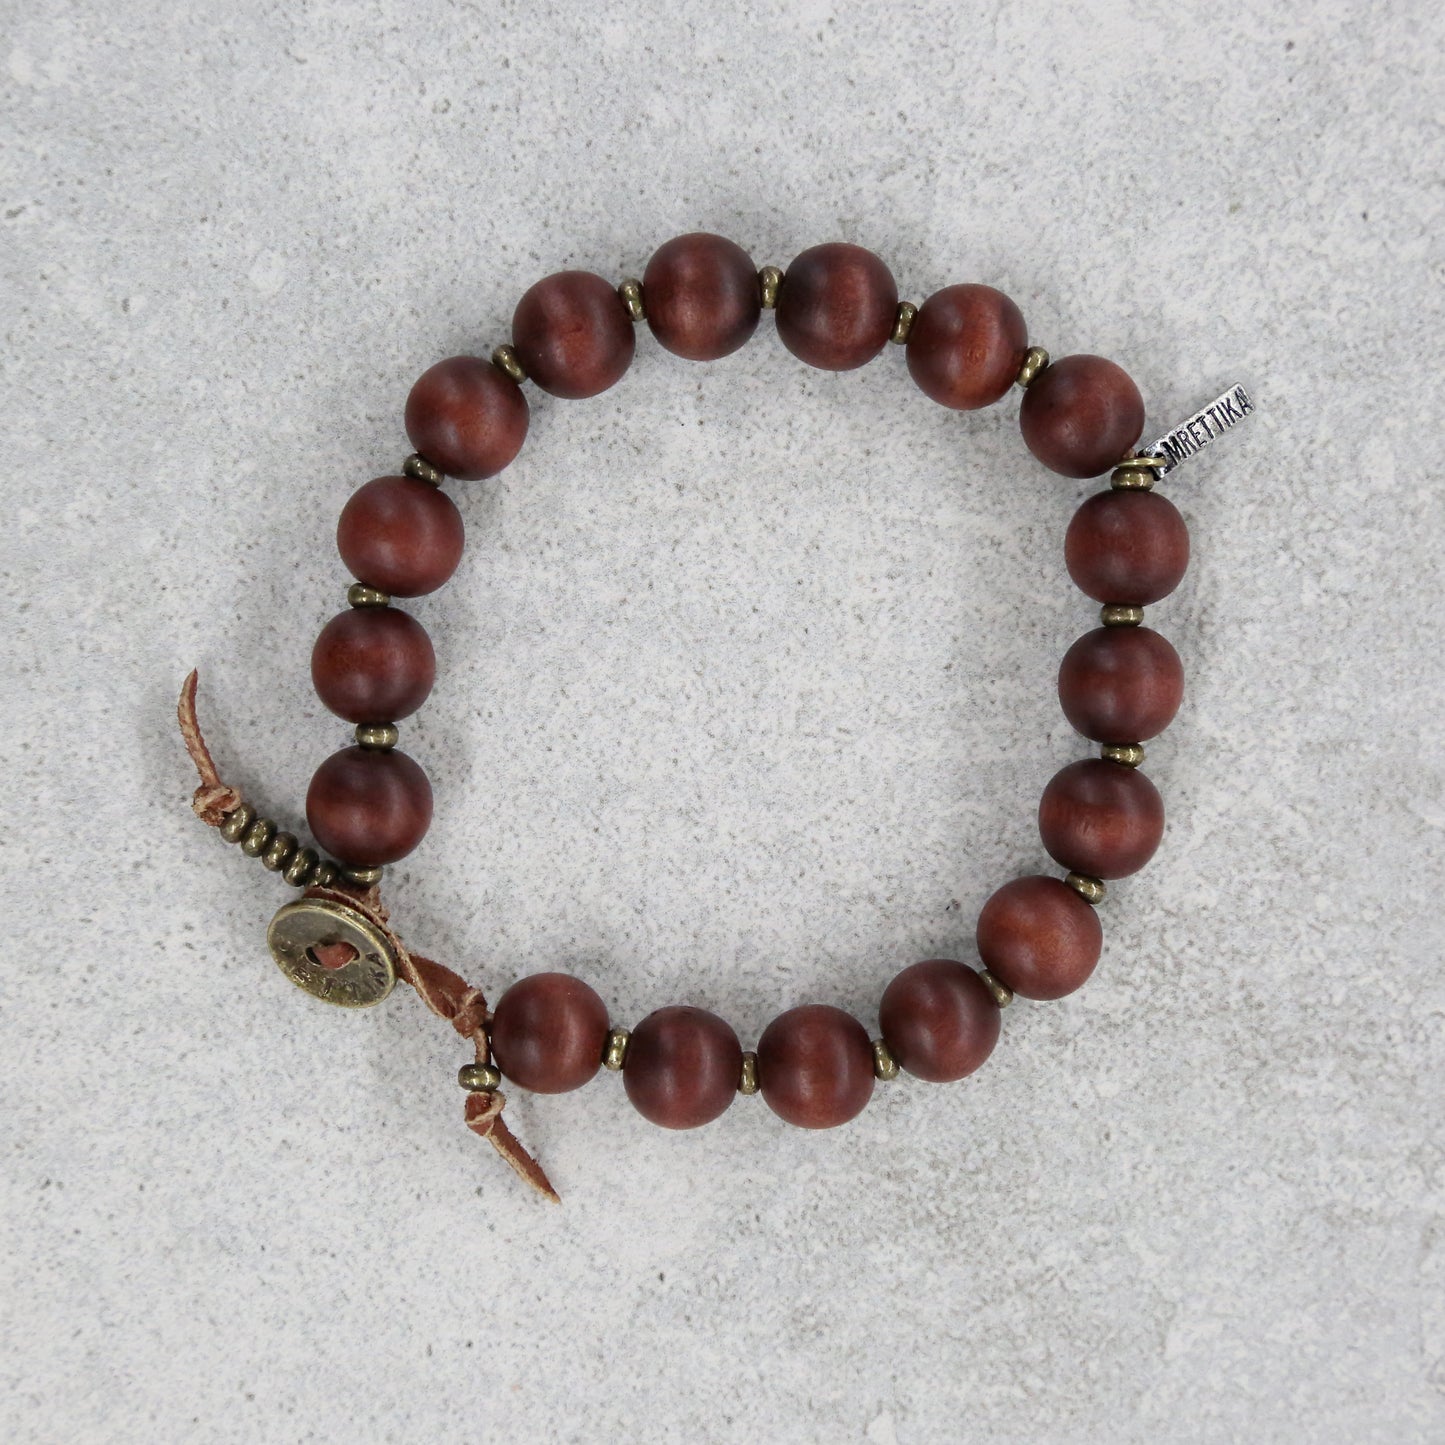 Bodhi Seed and Brass Tiny Disc Bead Spacer on Rust Leather Bracelet